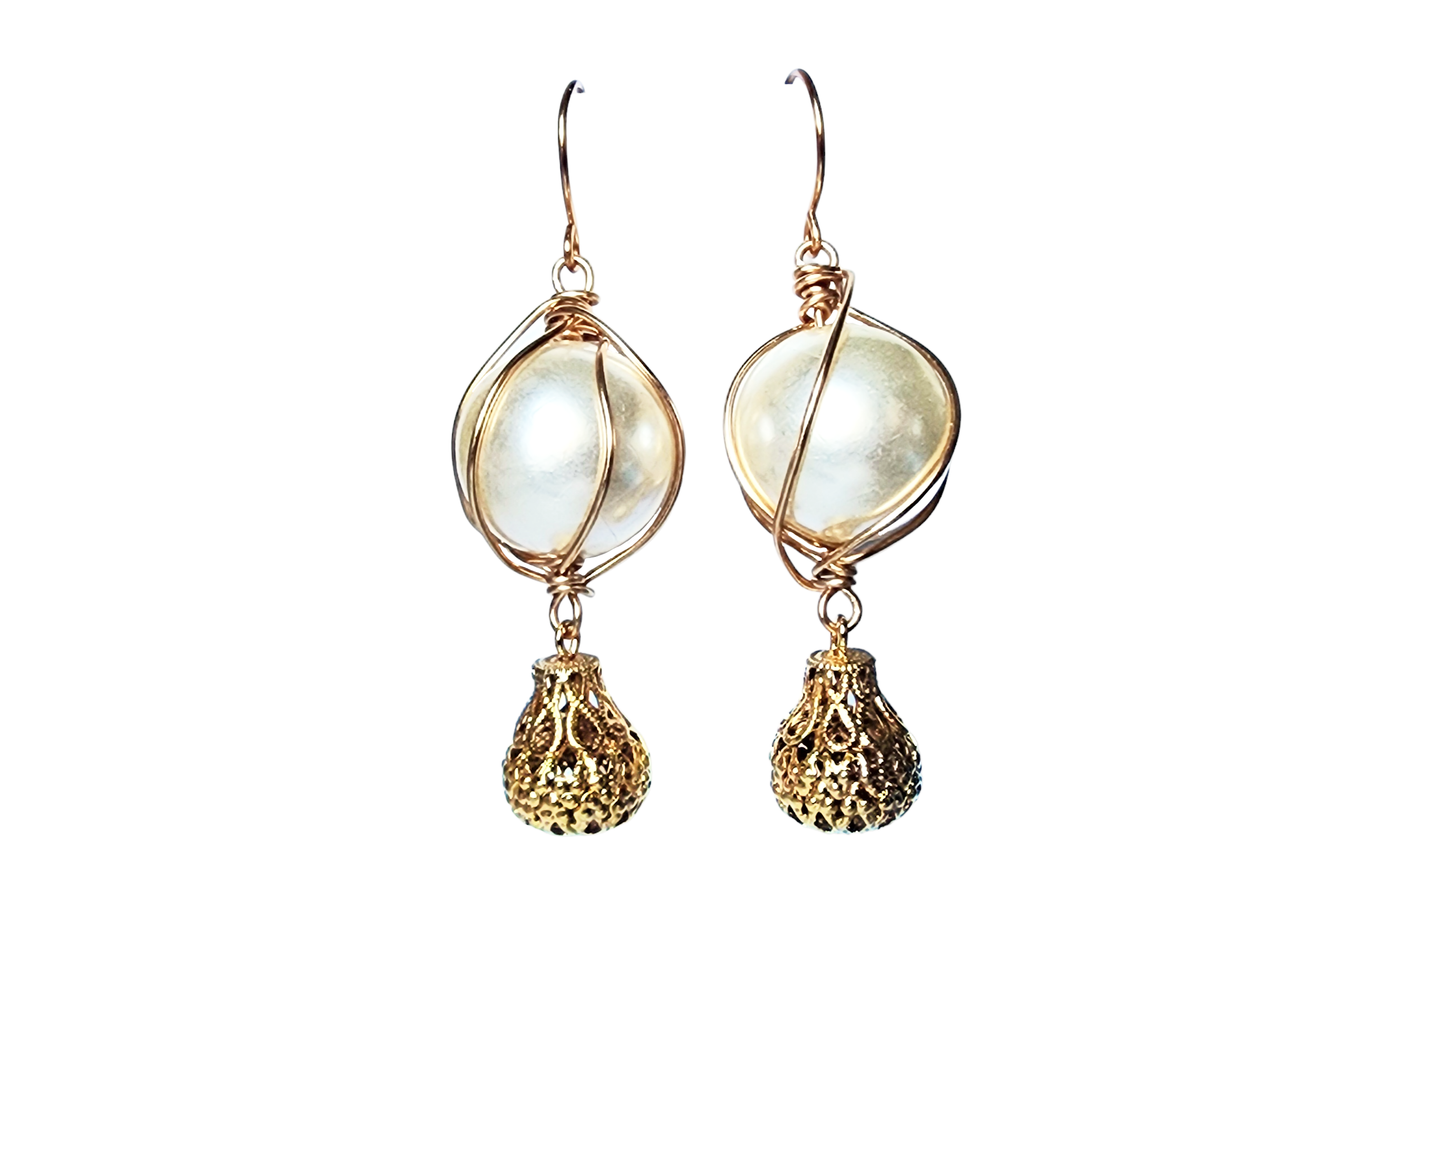 Long Elegant Large Pearl Dangle Earrings, Lage white peals, wrapped with gold wire and dangling filigree gold plated drops.